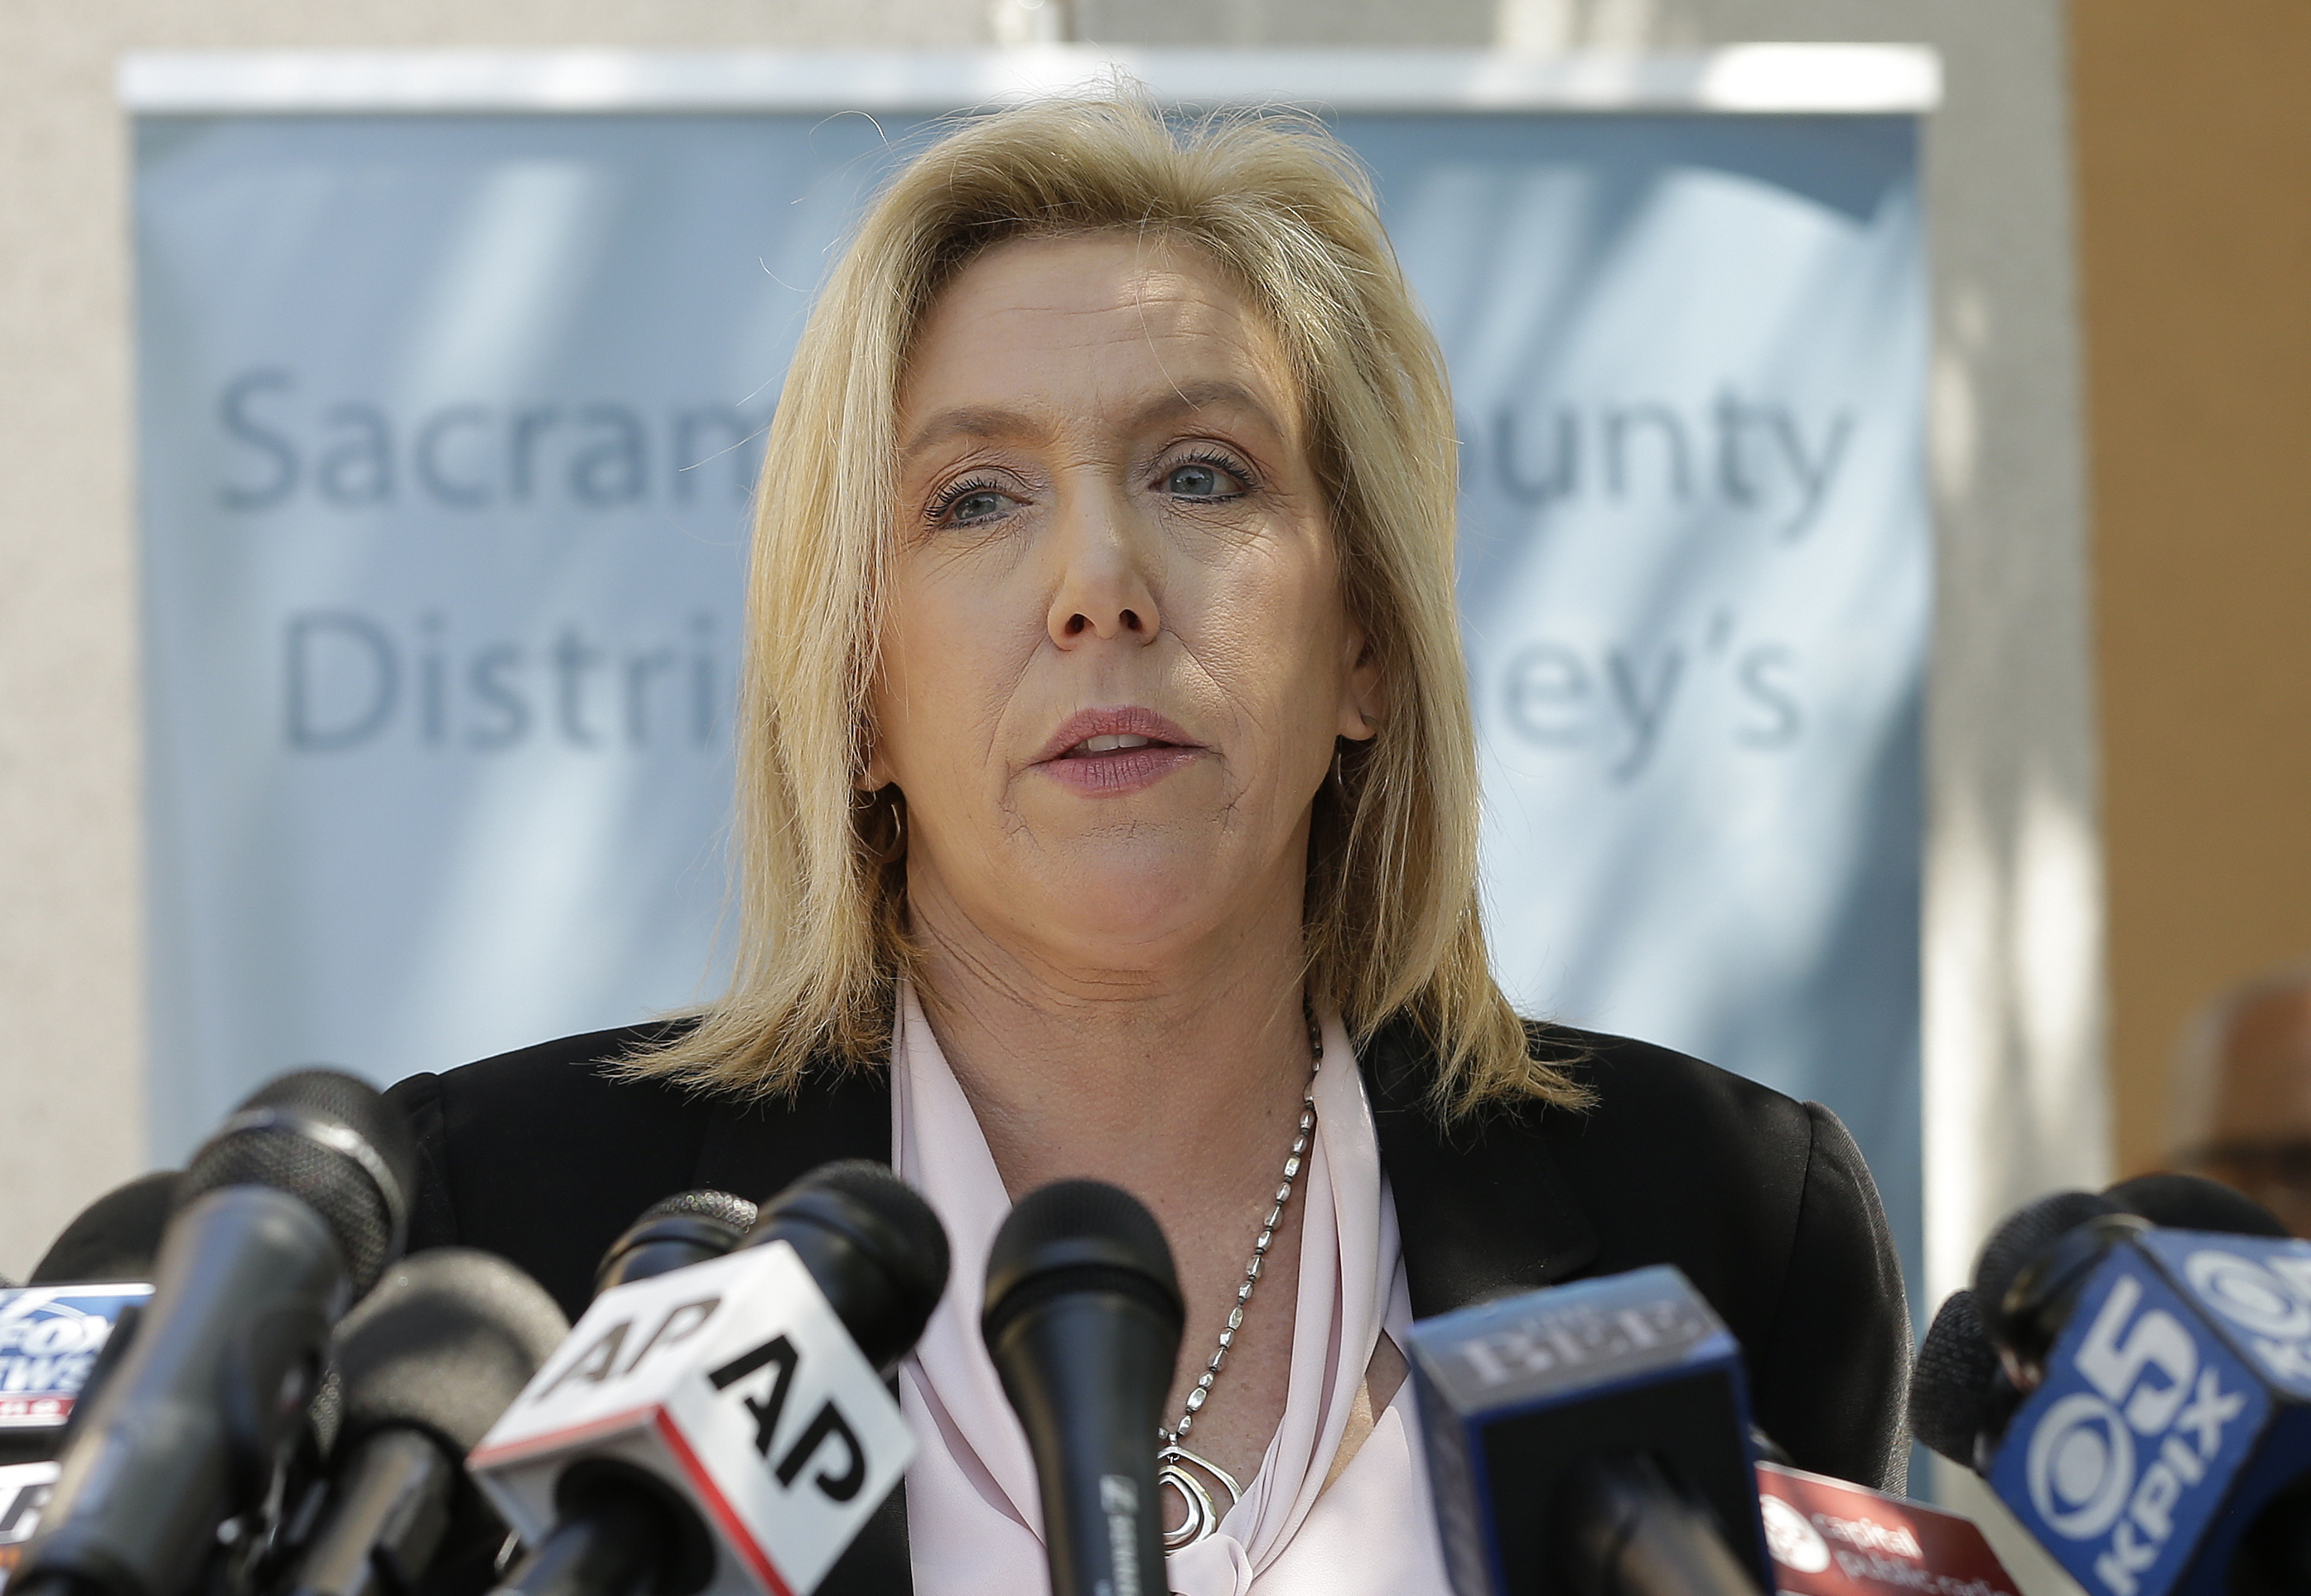 Sacramento County District Attorney Anne Marie Schubert said DeAngelo had not been on police radars until last week (AP Photo/Rich Pedroncelli)